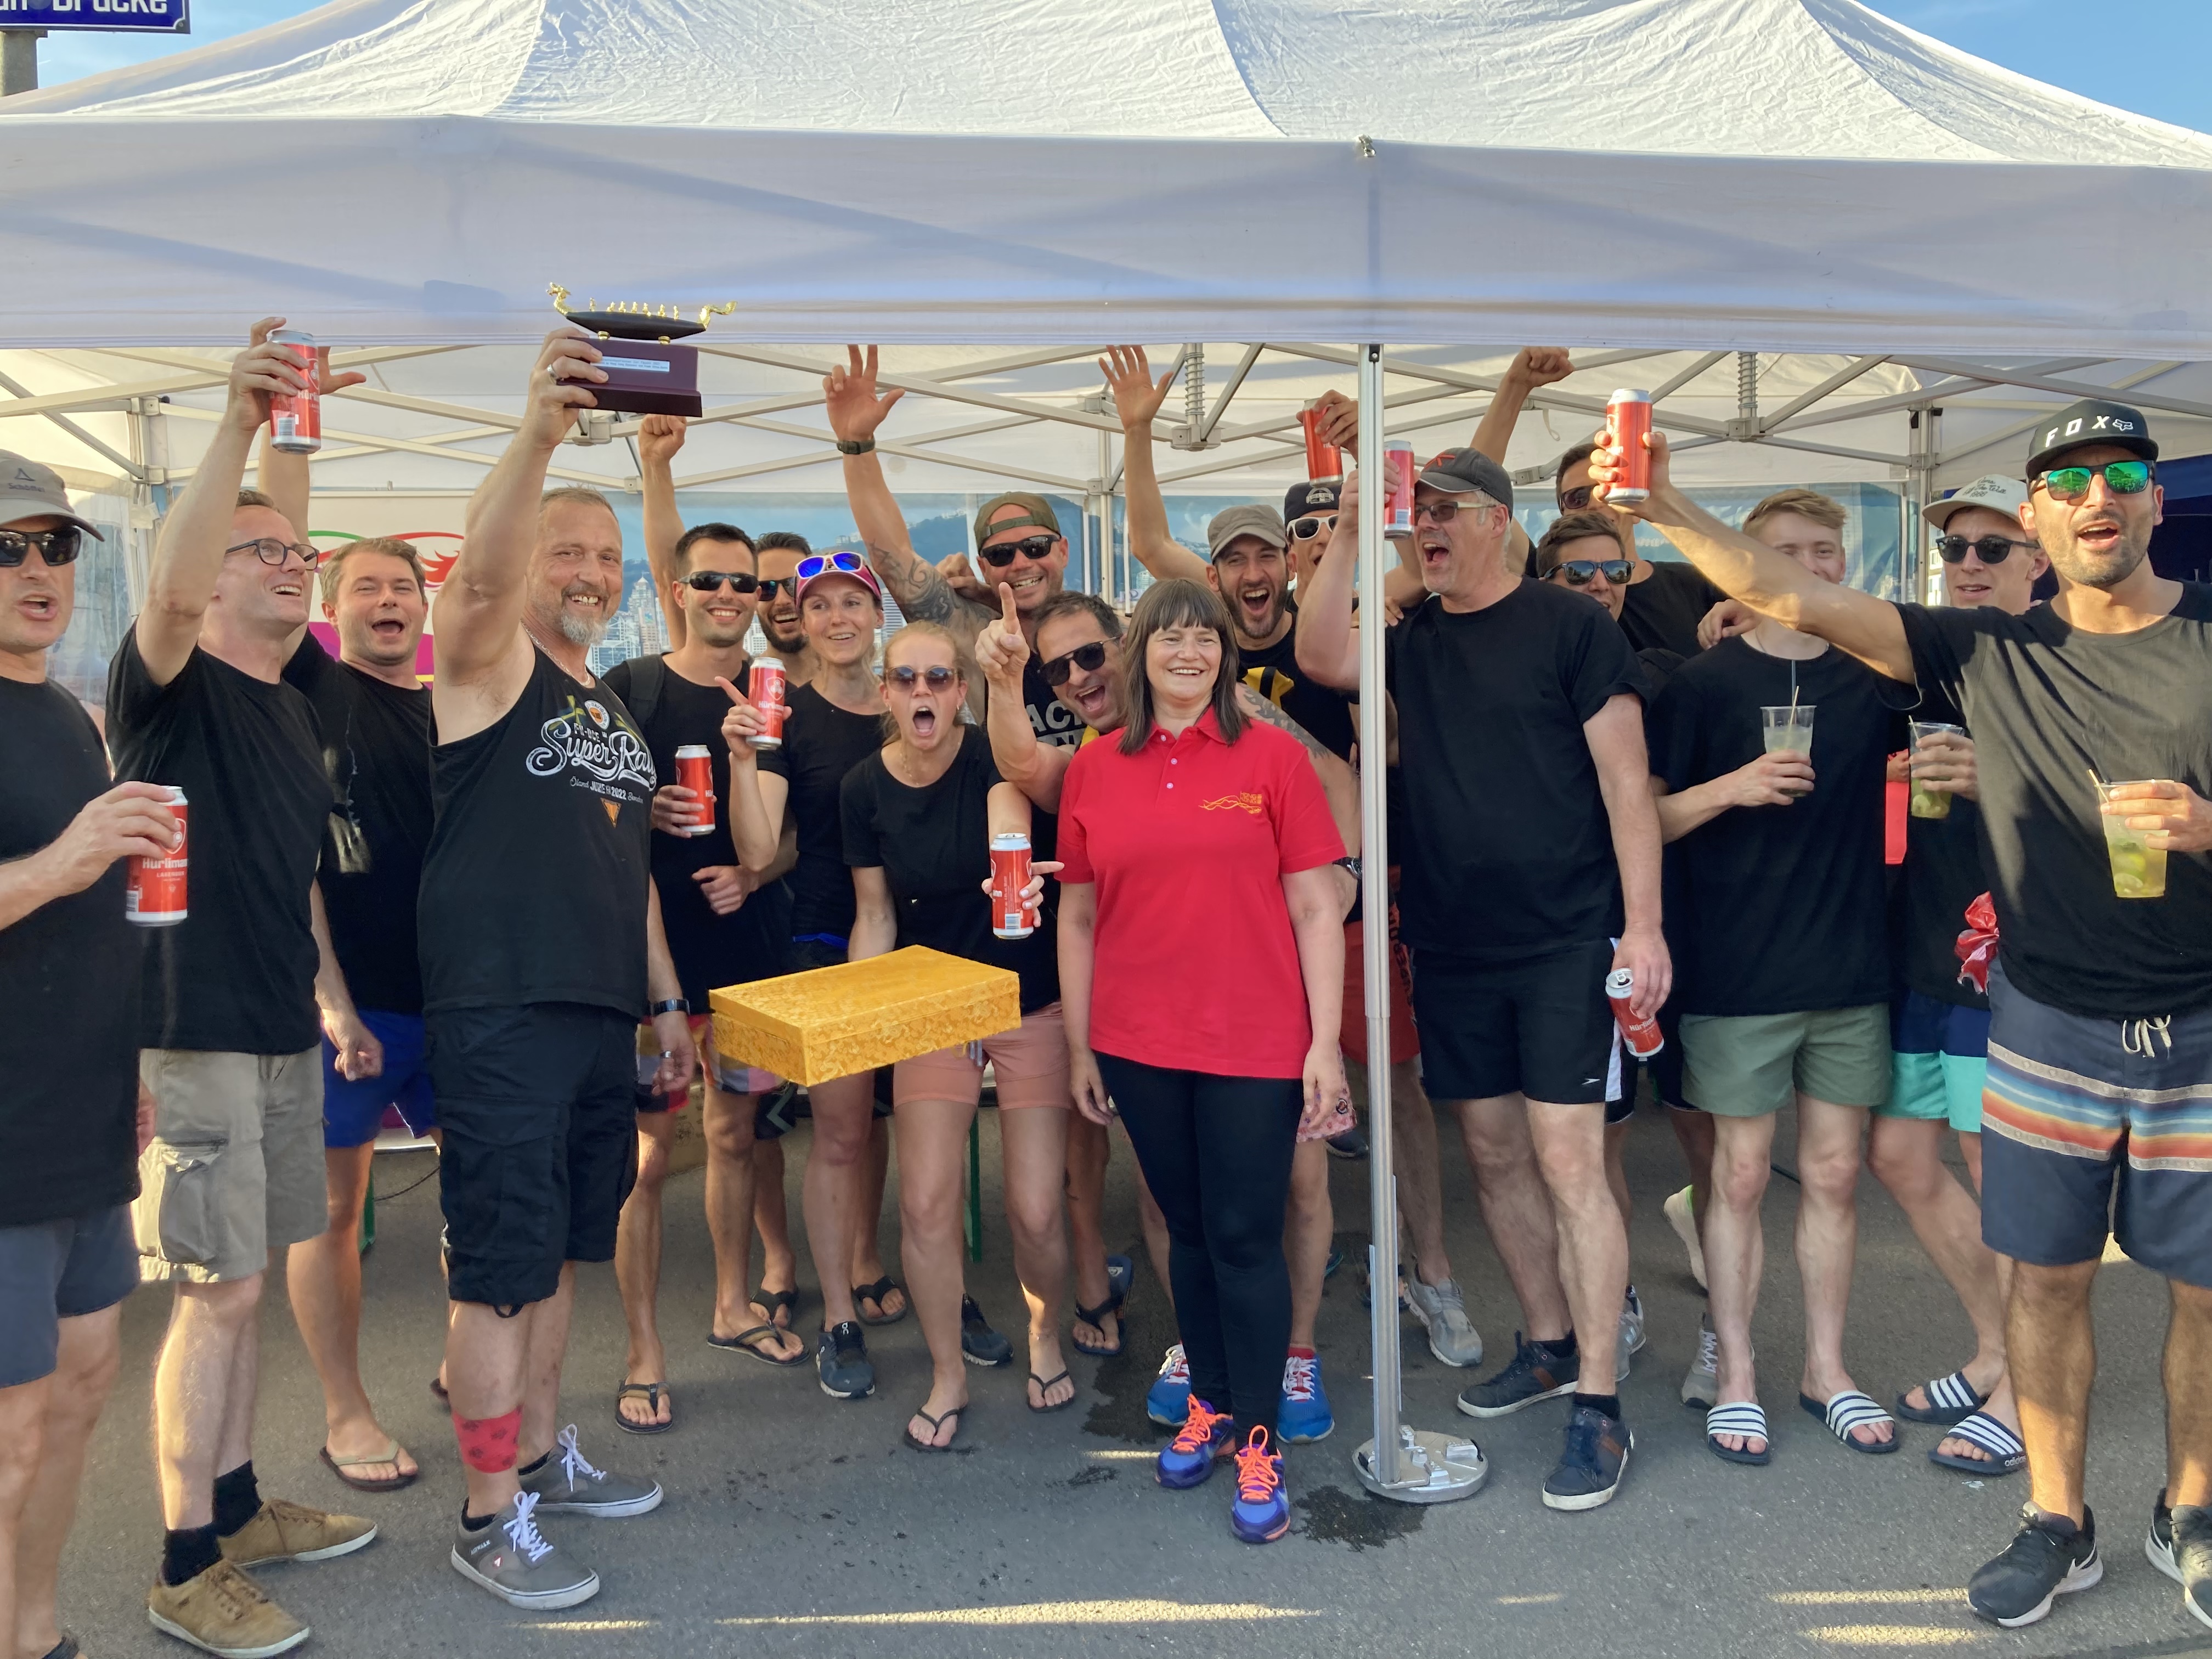 Ms Stephanie Pall, Head of Public Relations of HKETO Berlin, at the prize presentation ceremony of the dragon boat race at Züri Fäscht in Zurich, Switzerland, on July 8 (Zurich time).